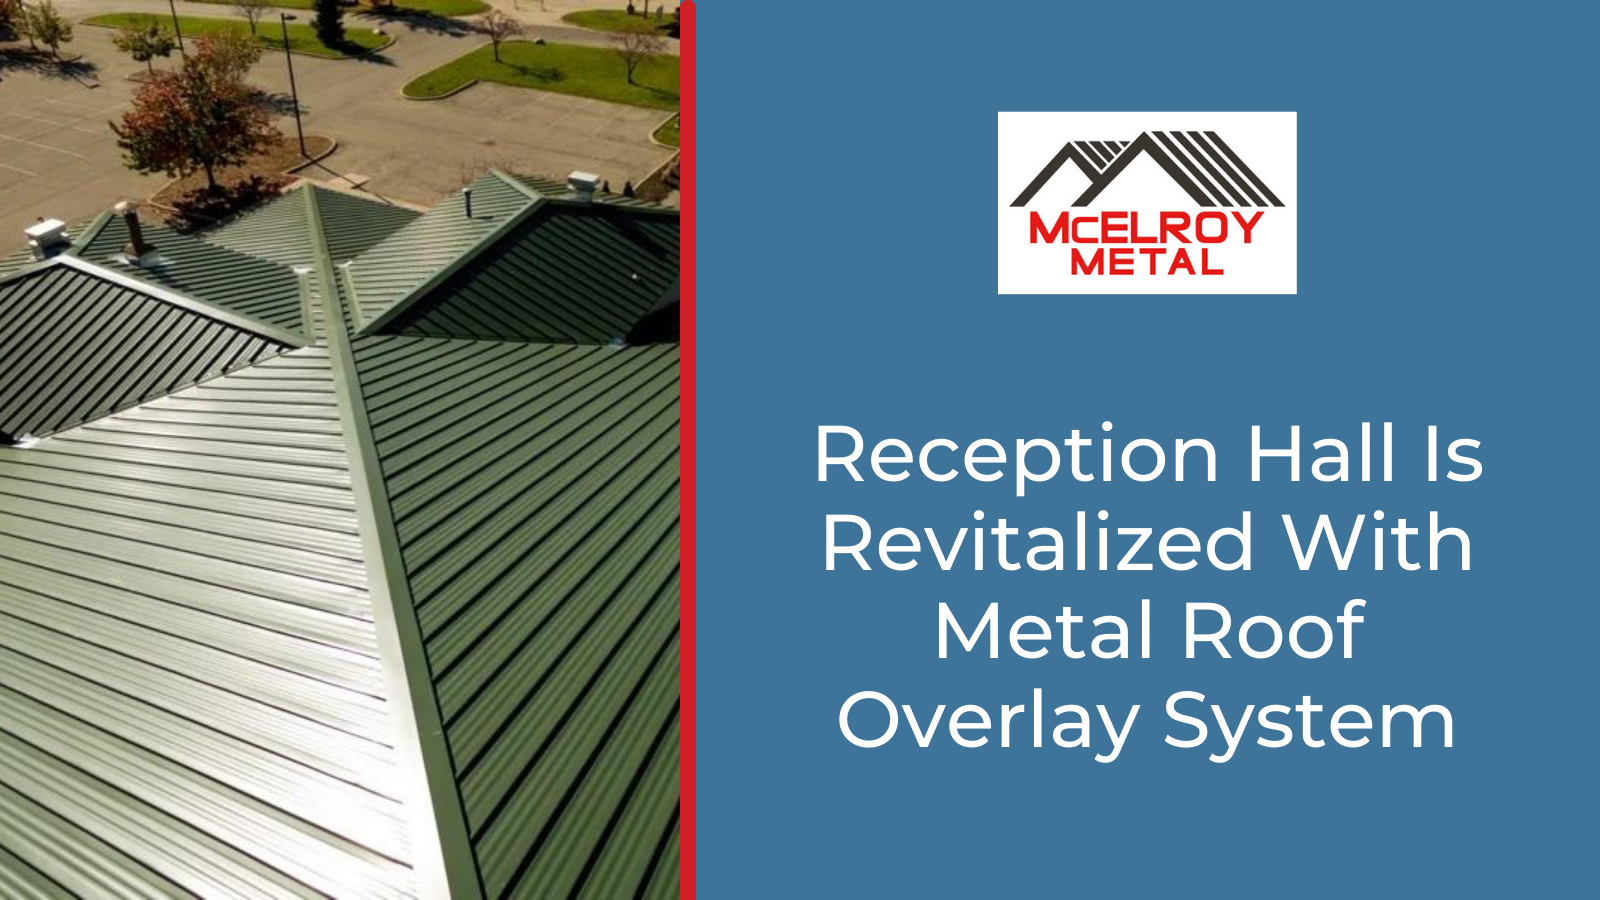 Reception Hall Is Revitalized With Metal Roof Overlay System